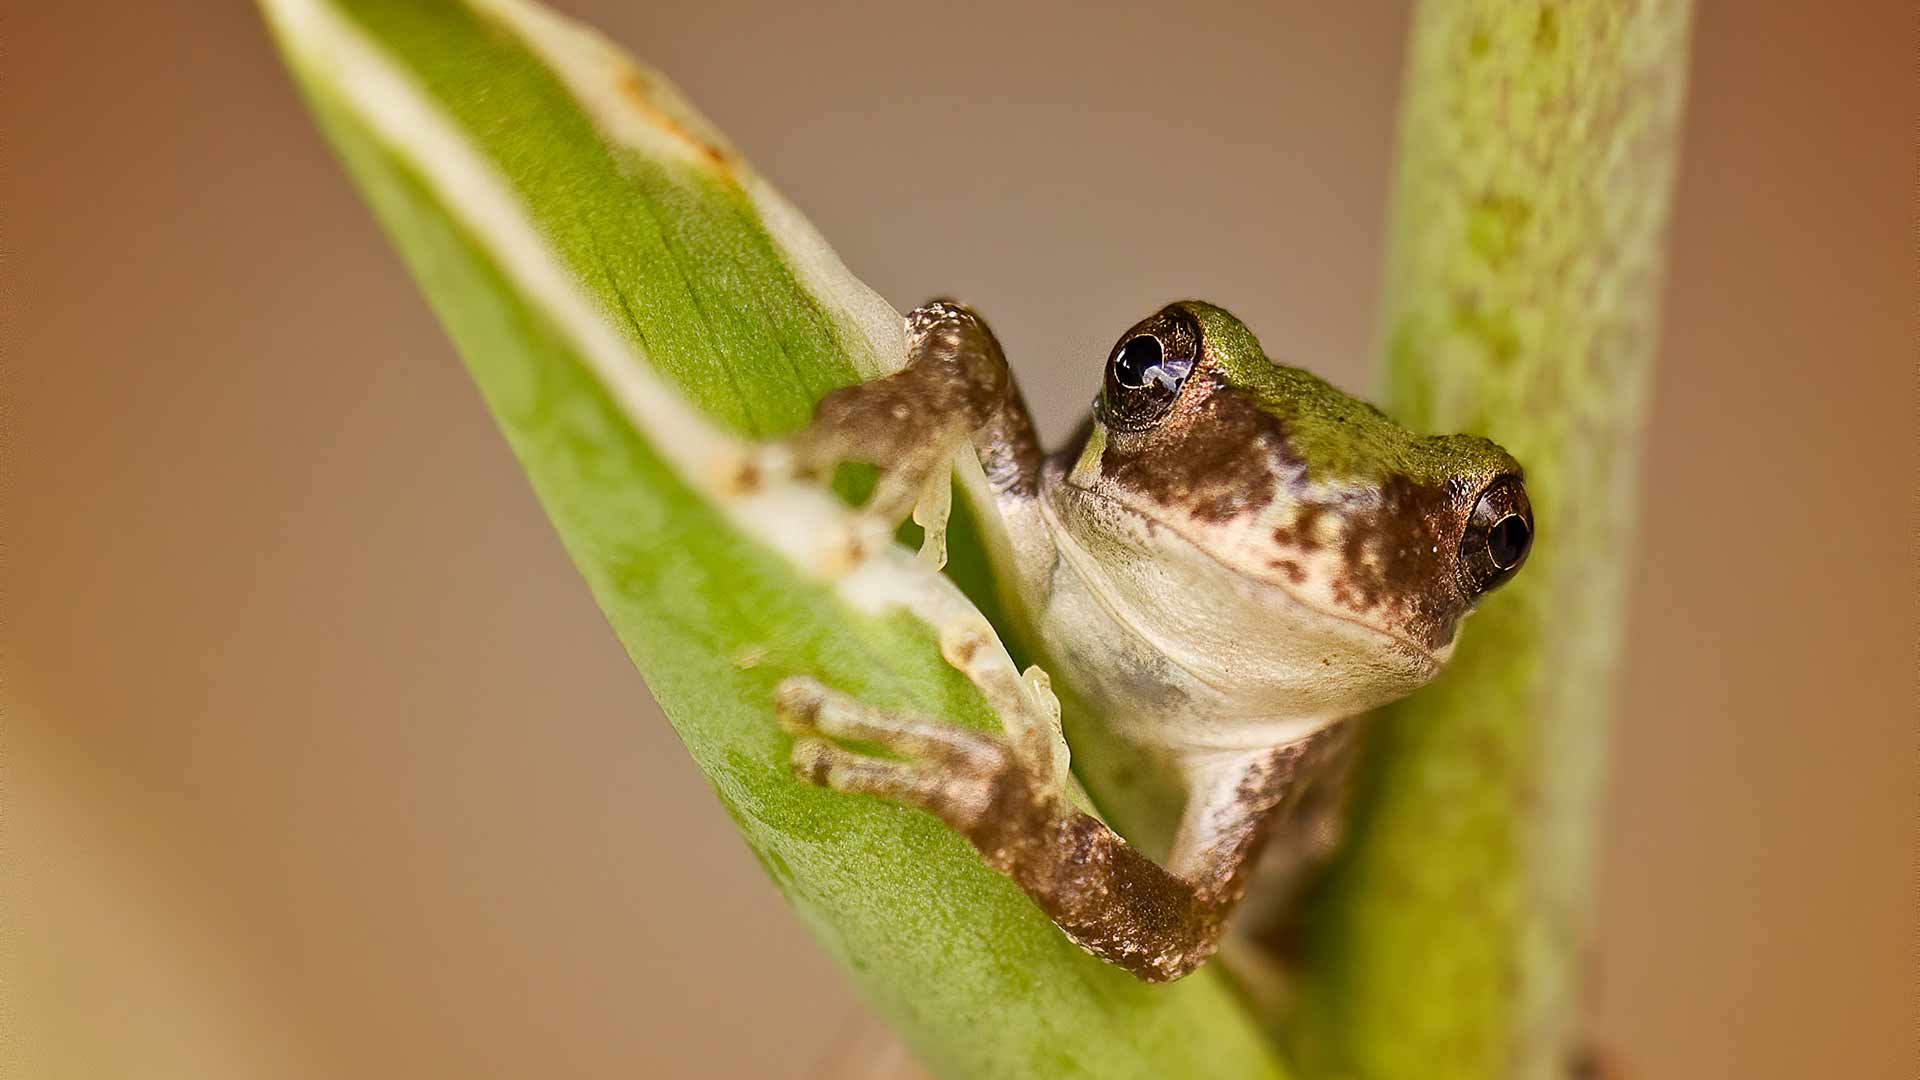 The Gray Treefrog Is A Master Of Disguise - Nature Canada